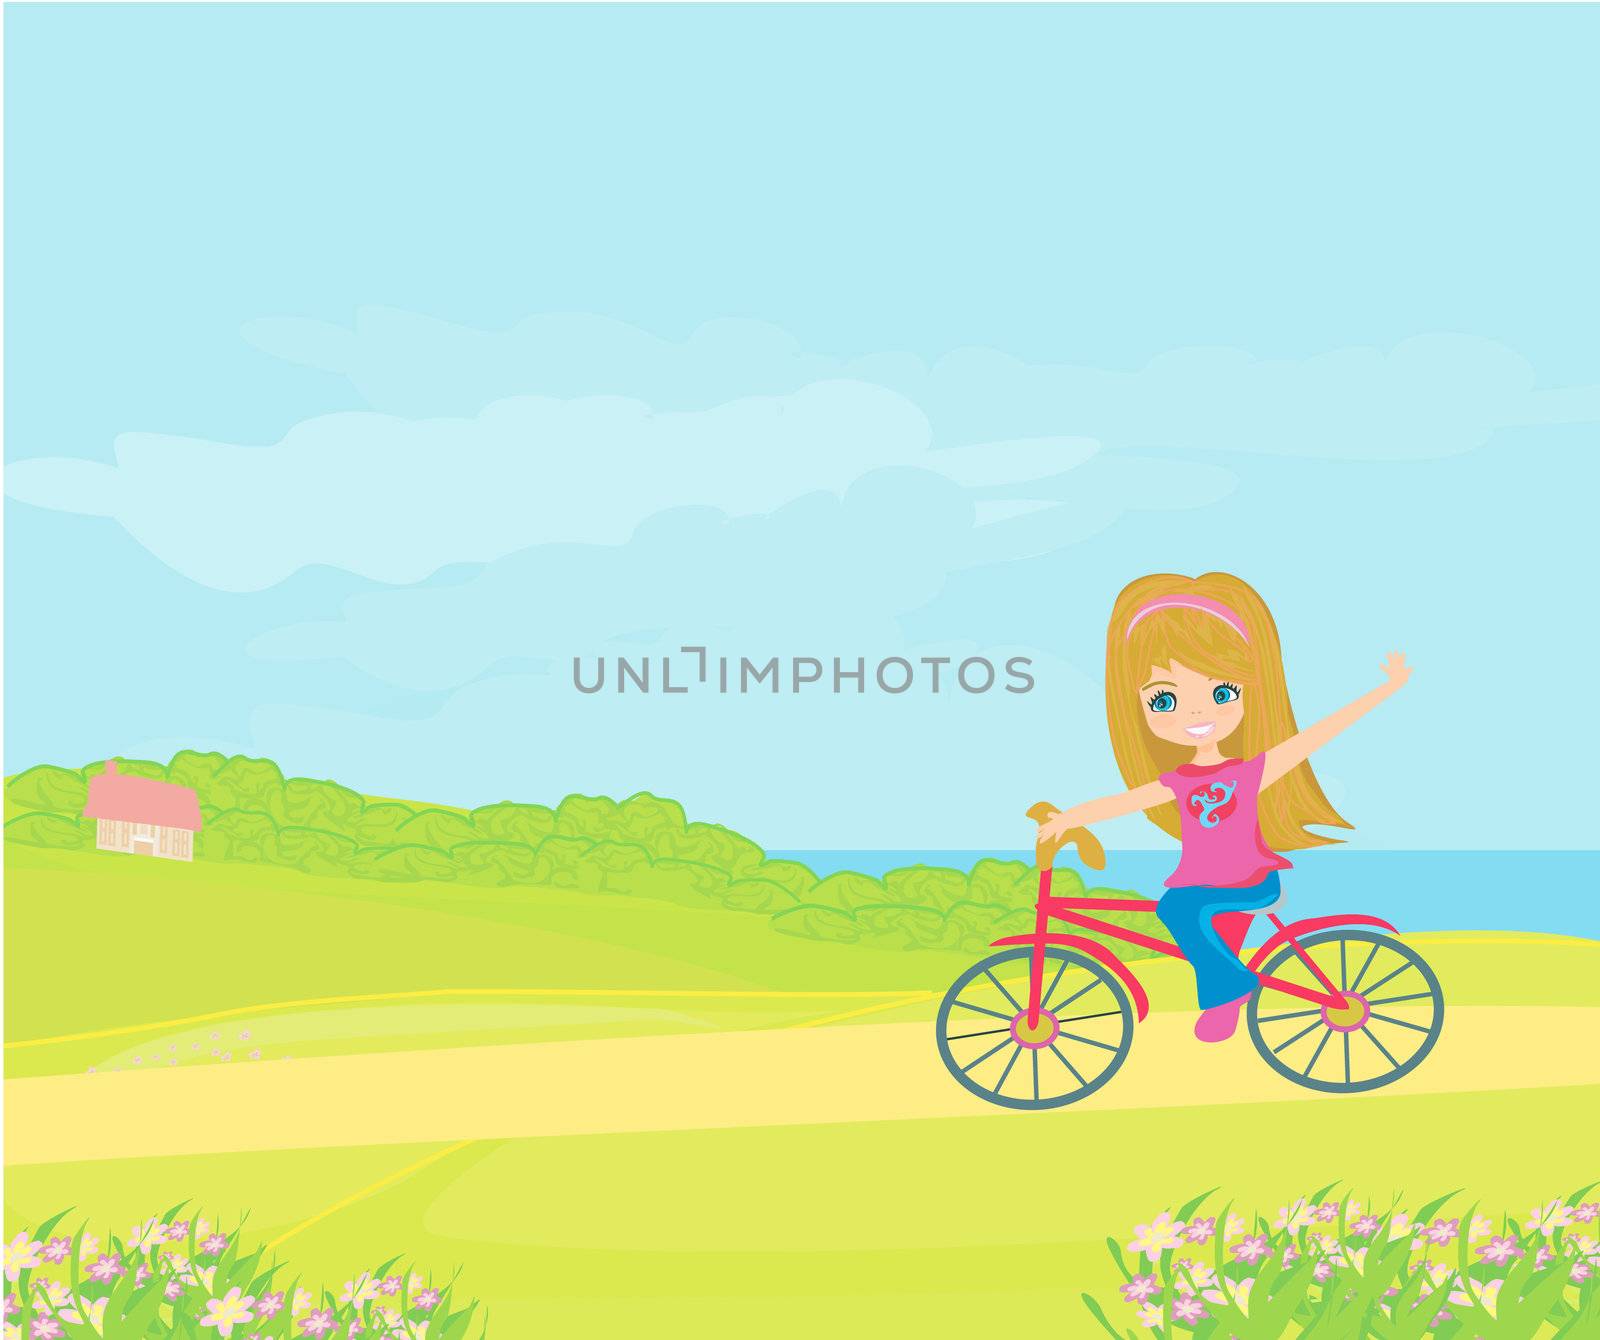 Happy Driving Bike with Cute Smiling Young Girl by JackyBrown